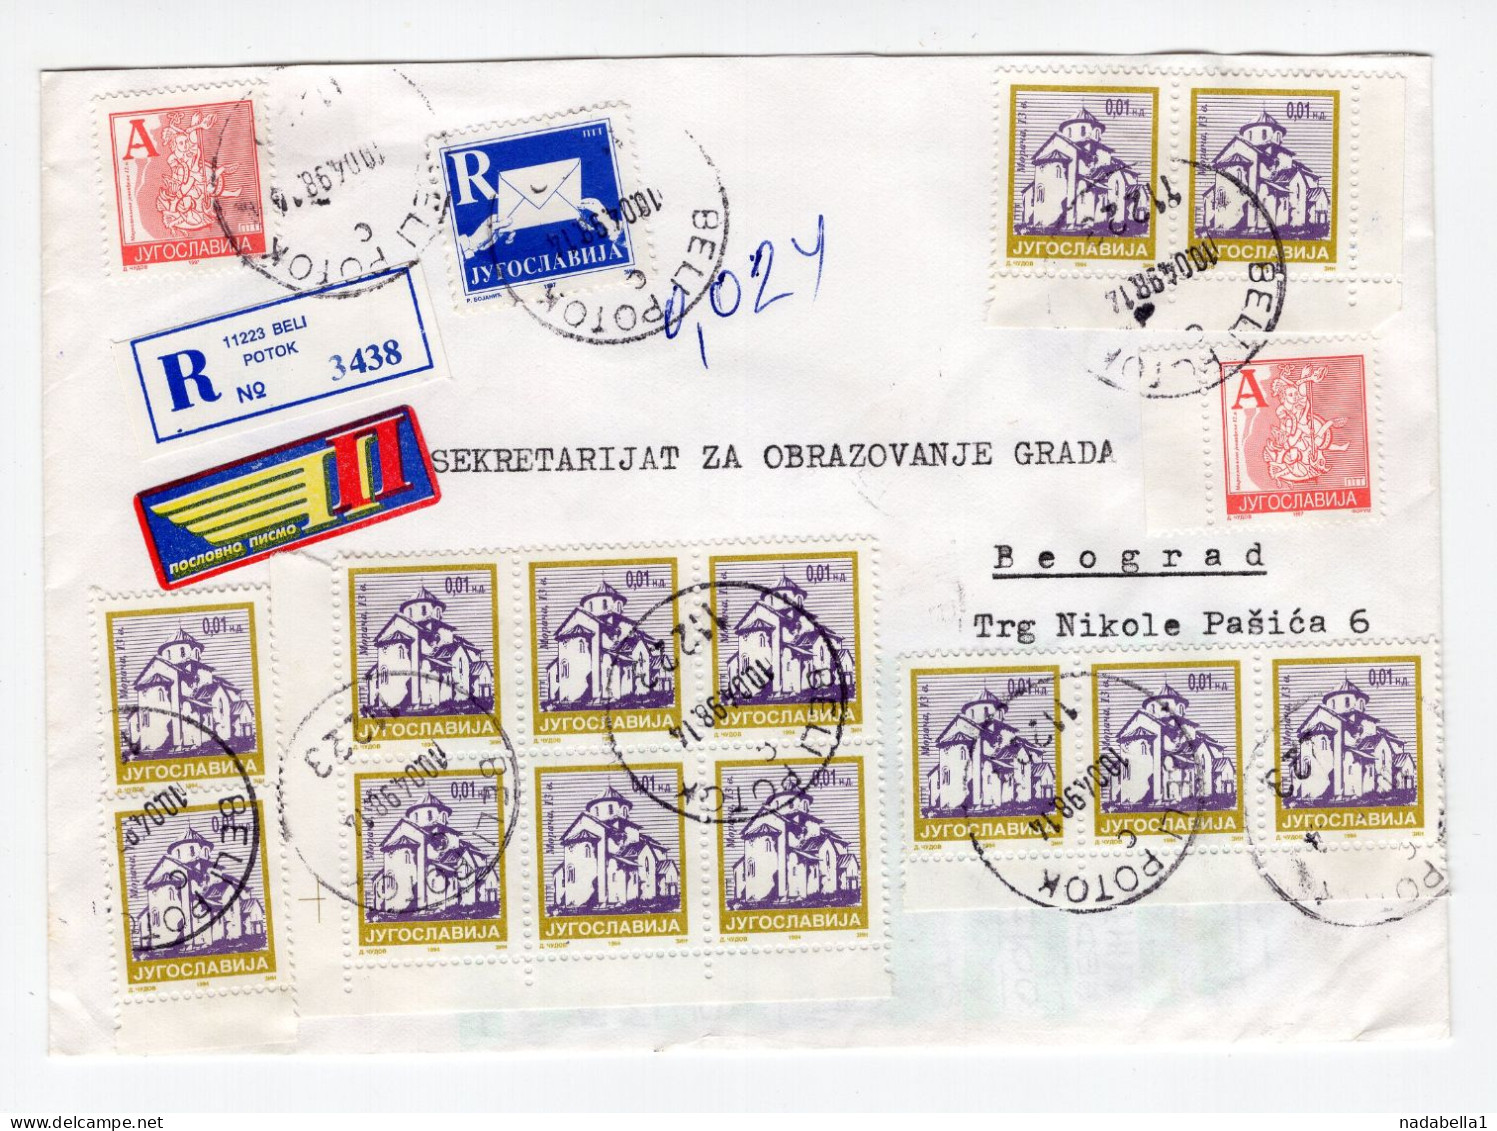 1998. YUGOSLAVIA,SERBIA,BELI POTOK,RECORDED COVER SENT TO BELGRADE,INFLATION,INFLATIONARY MAIL - Covers & Documents